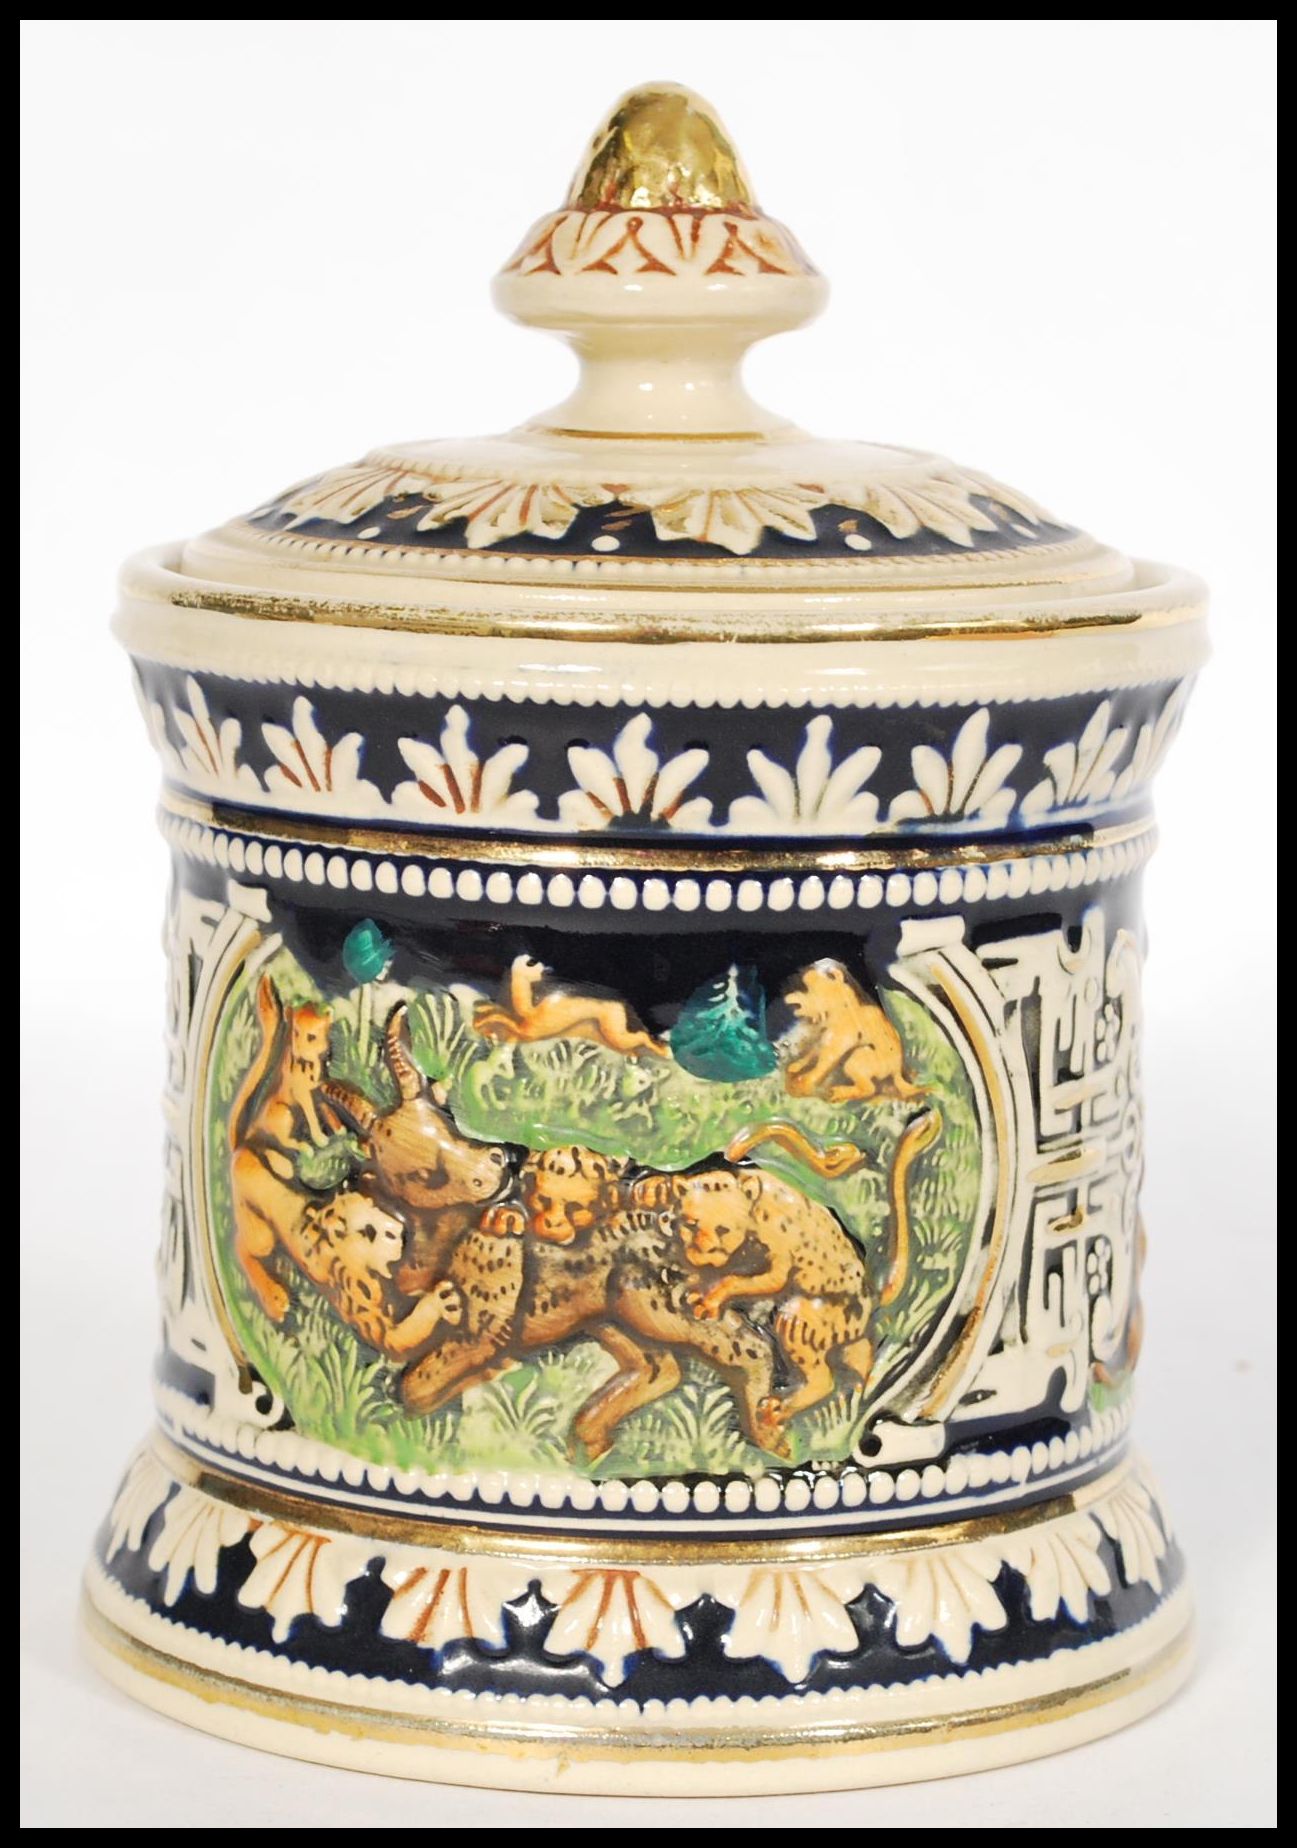 A vintage 20th century German stoneware tobacco jar humidor pot having relief scenes of lions and